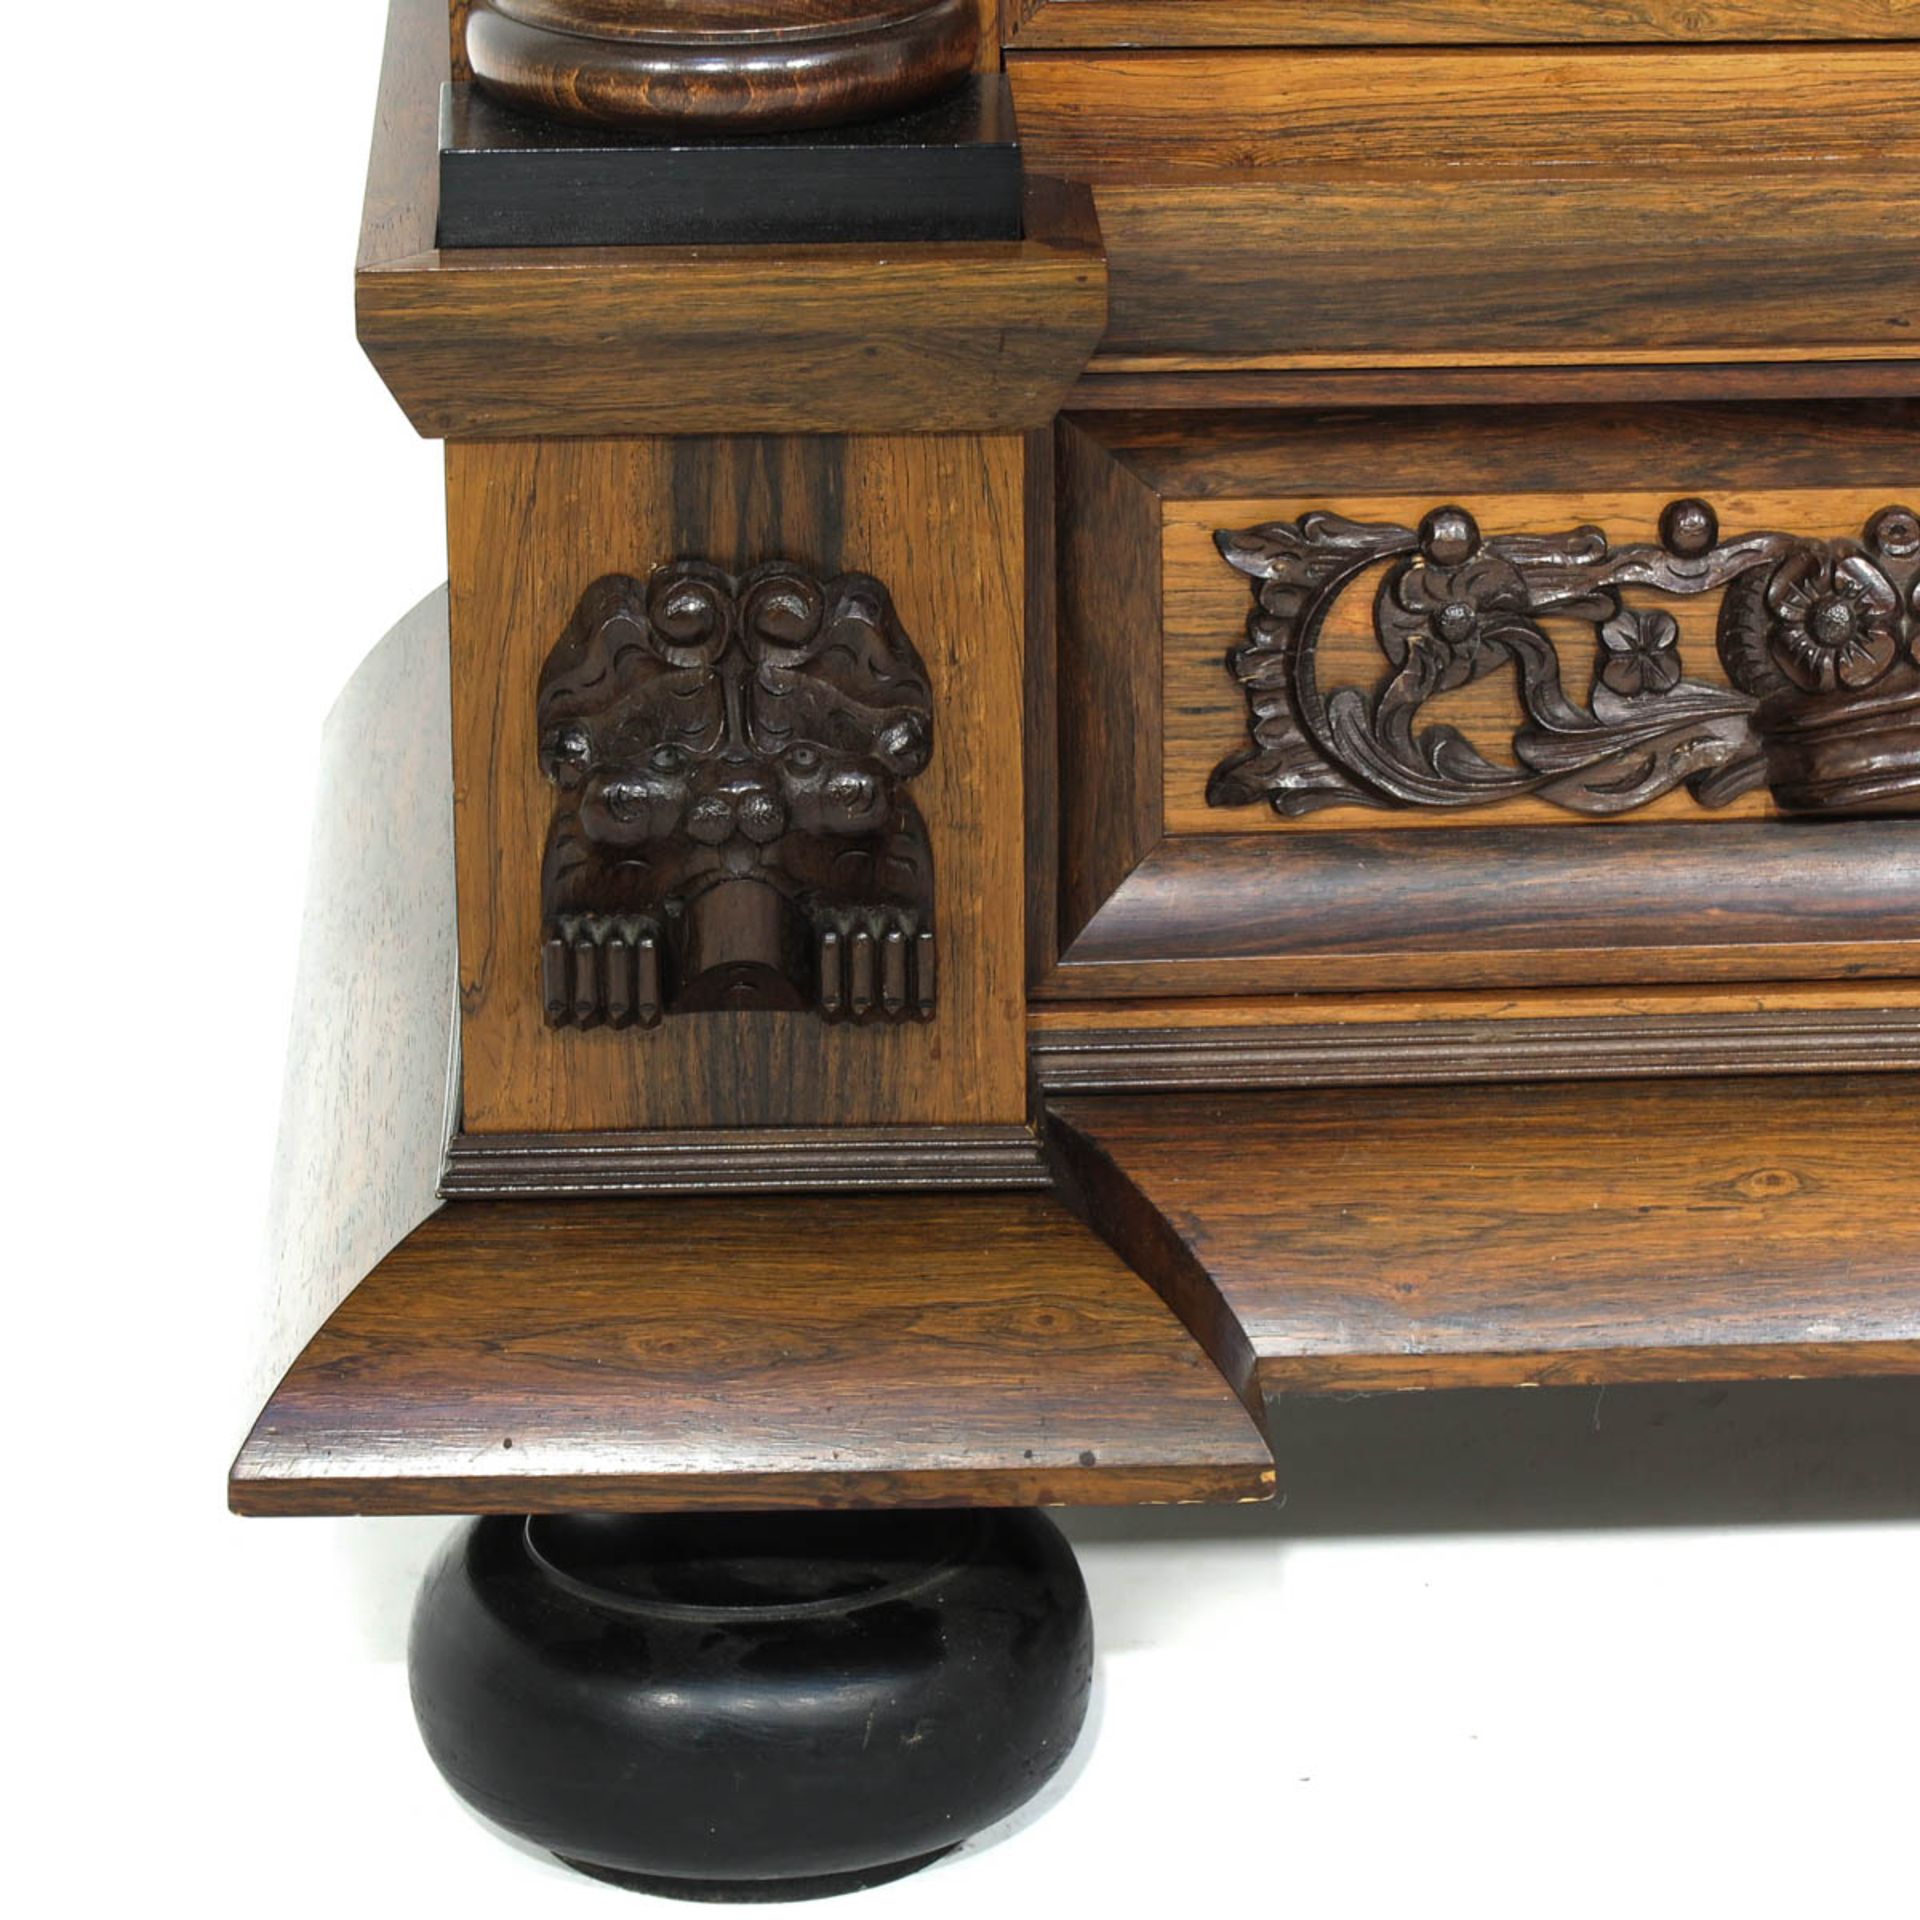 A Very Beautifully Carved Cabinet or Kussenkast - Image 10 of 10